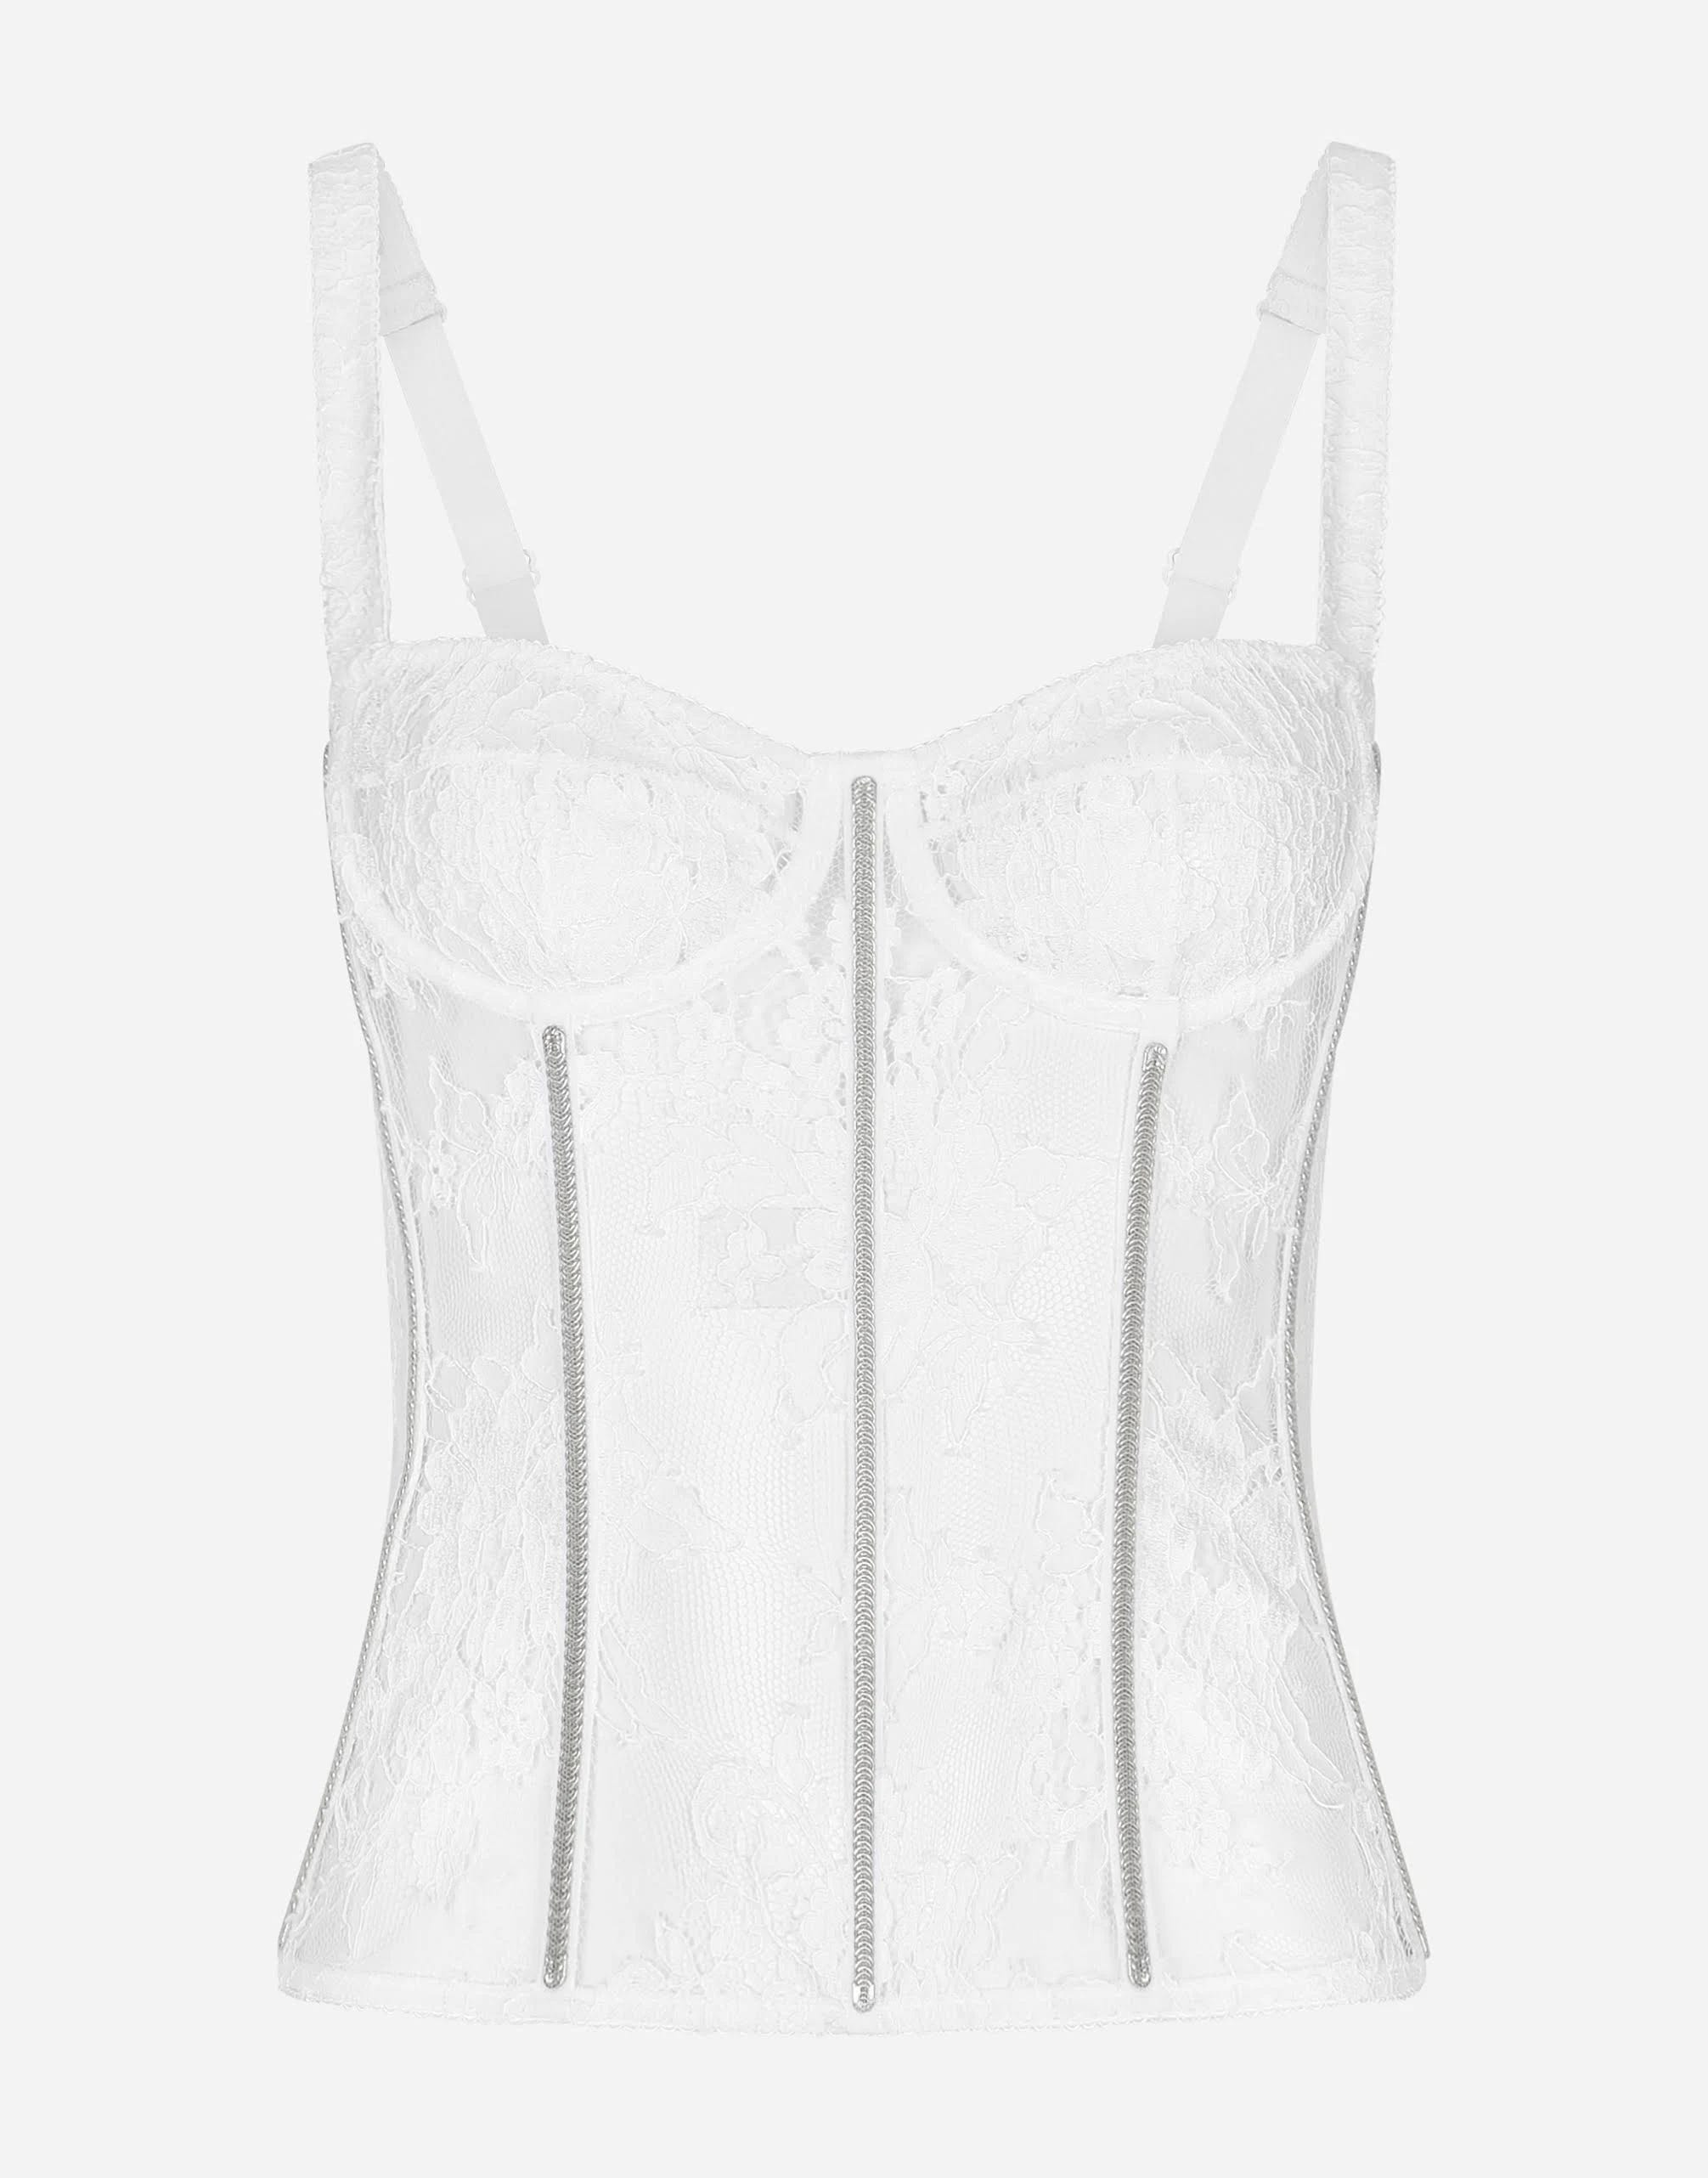 Classic Italian White Lace Lingerie Bustier | Image